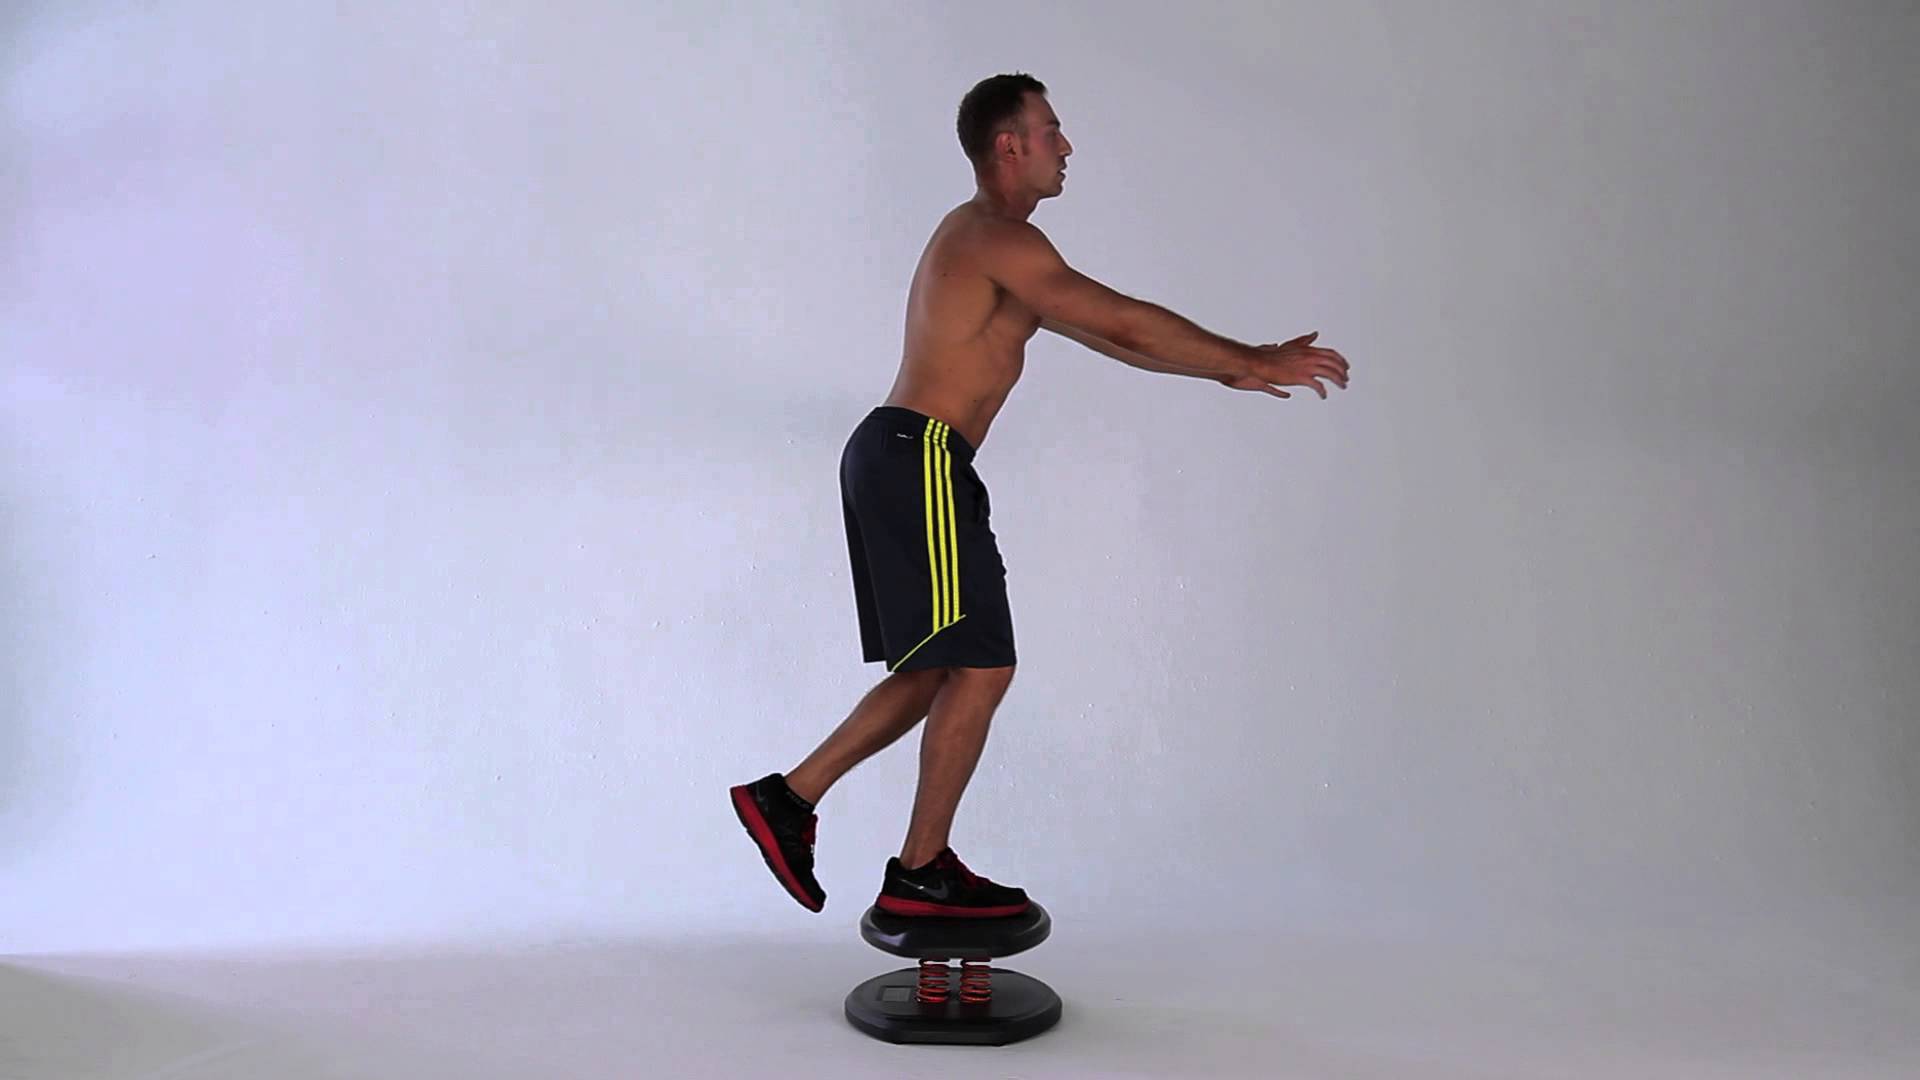 Single Leg Squat StrongBoard Balance Board Exercise Guide | vlr.eng.br